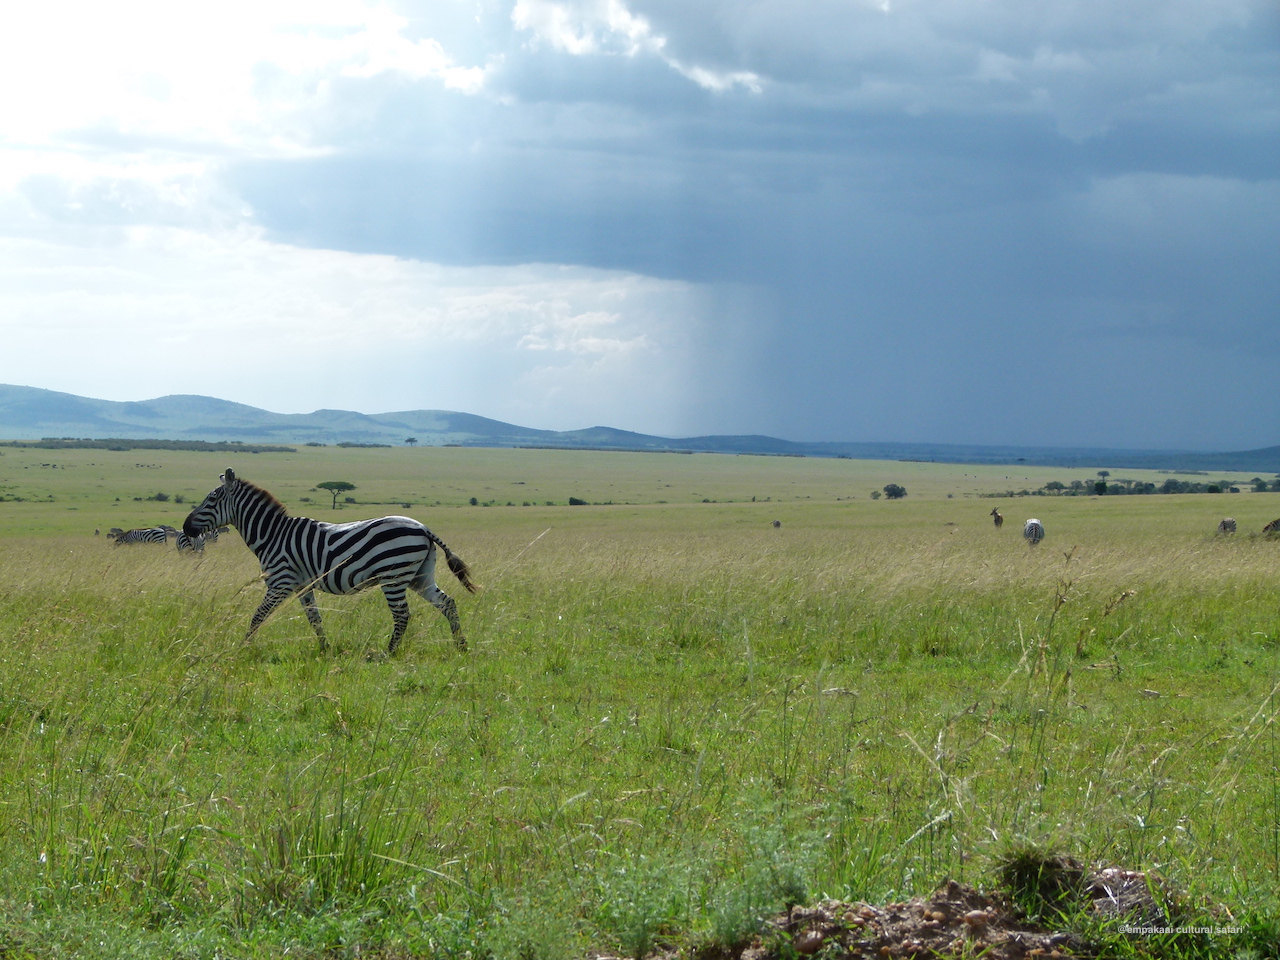 Maasai Mara is simply overwhelming. We had many exciting encounters there!